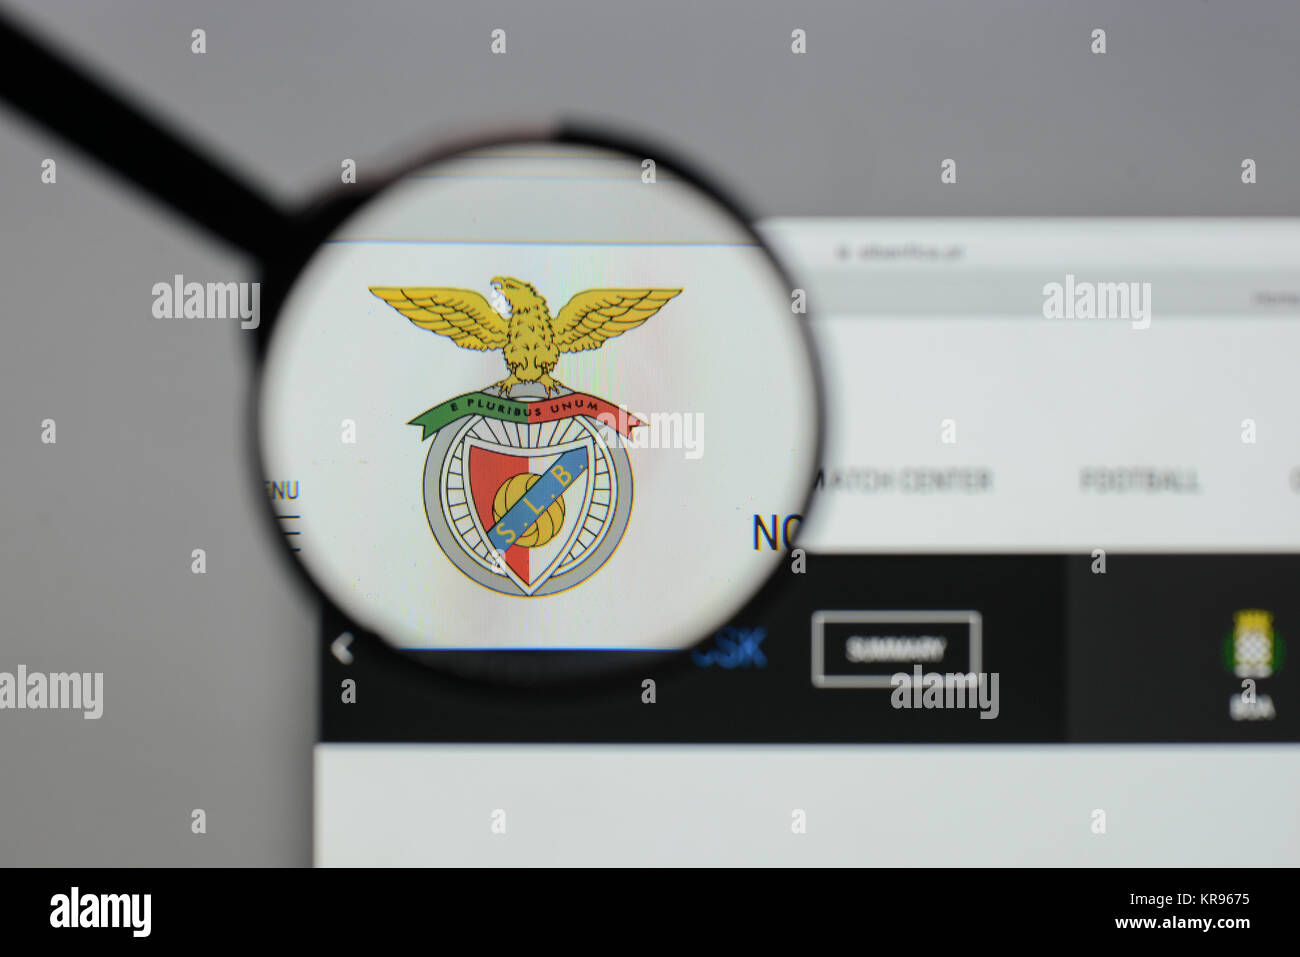 Milan, Italy - August 10, 2017: Benfica Lisbona logo on the website homepage. Stock Photo